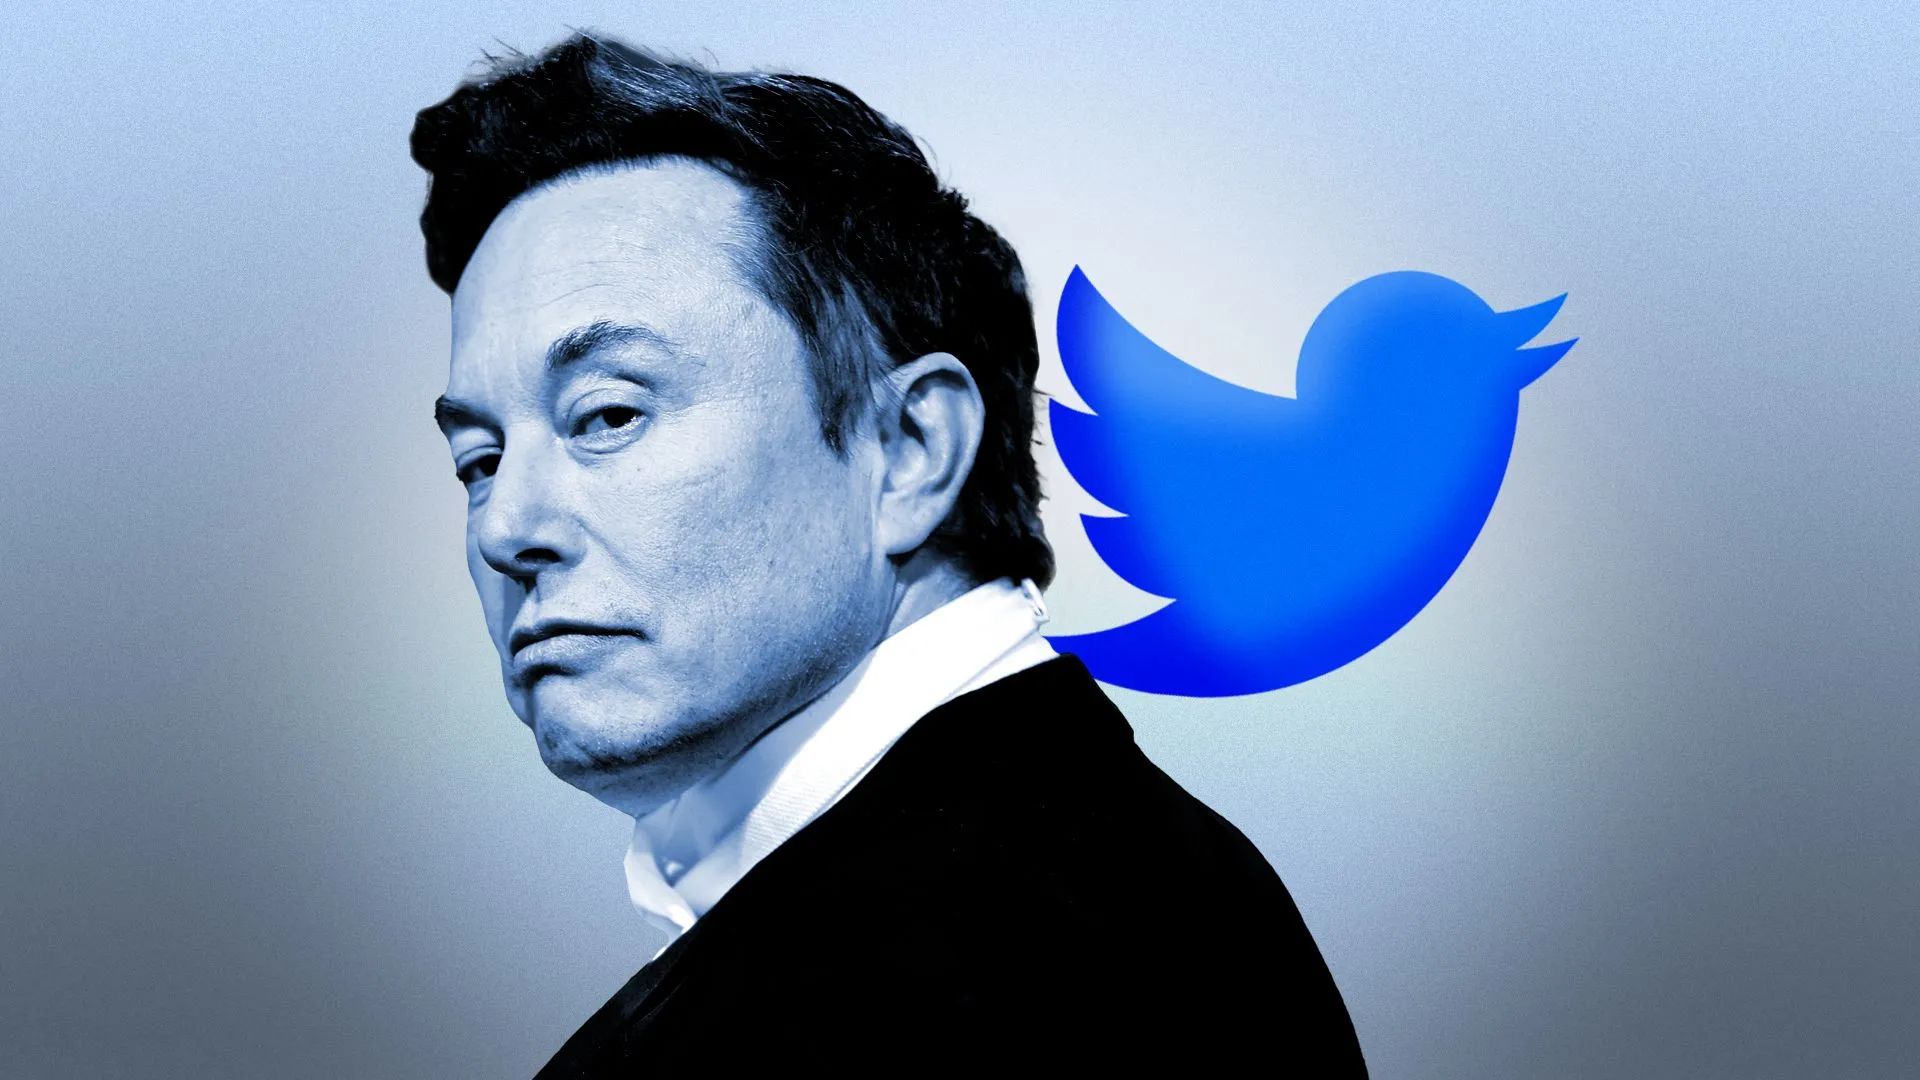 Elon Musk’s X Faces Global Outage, Leaving Users Unable To View Tweets